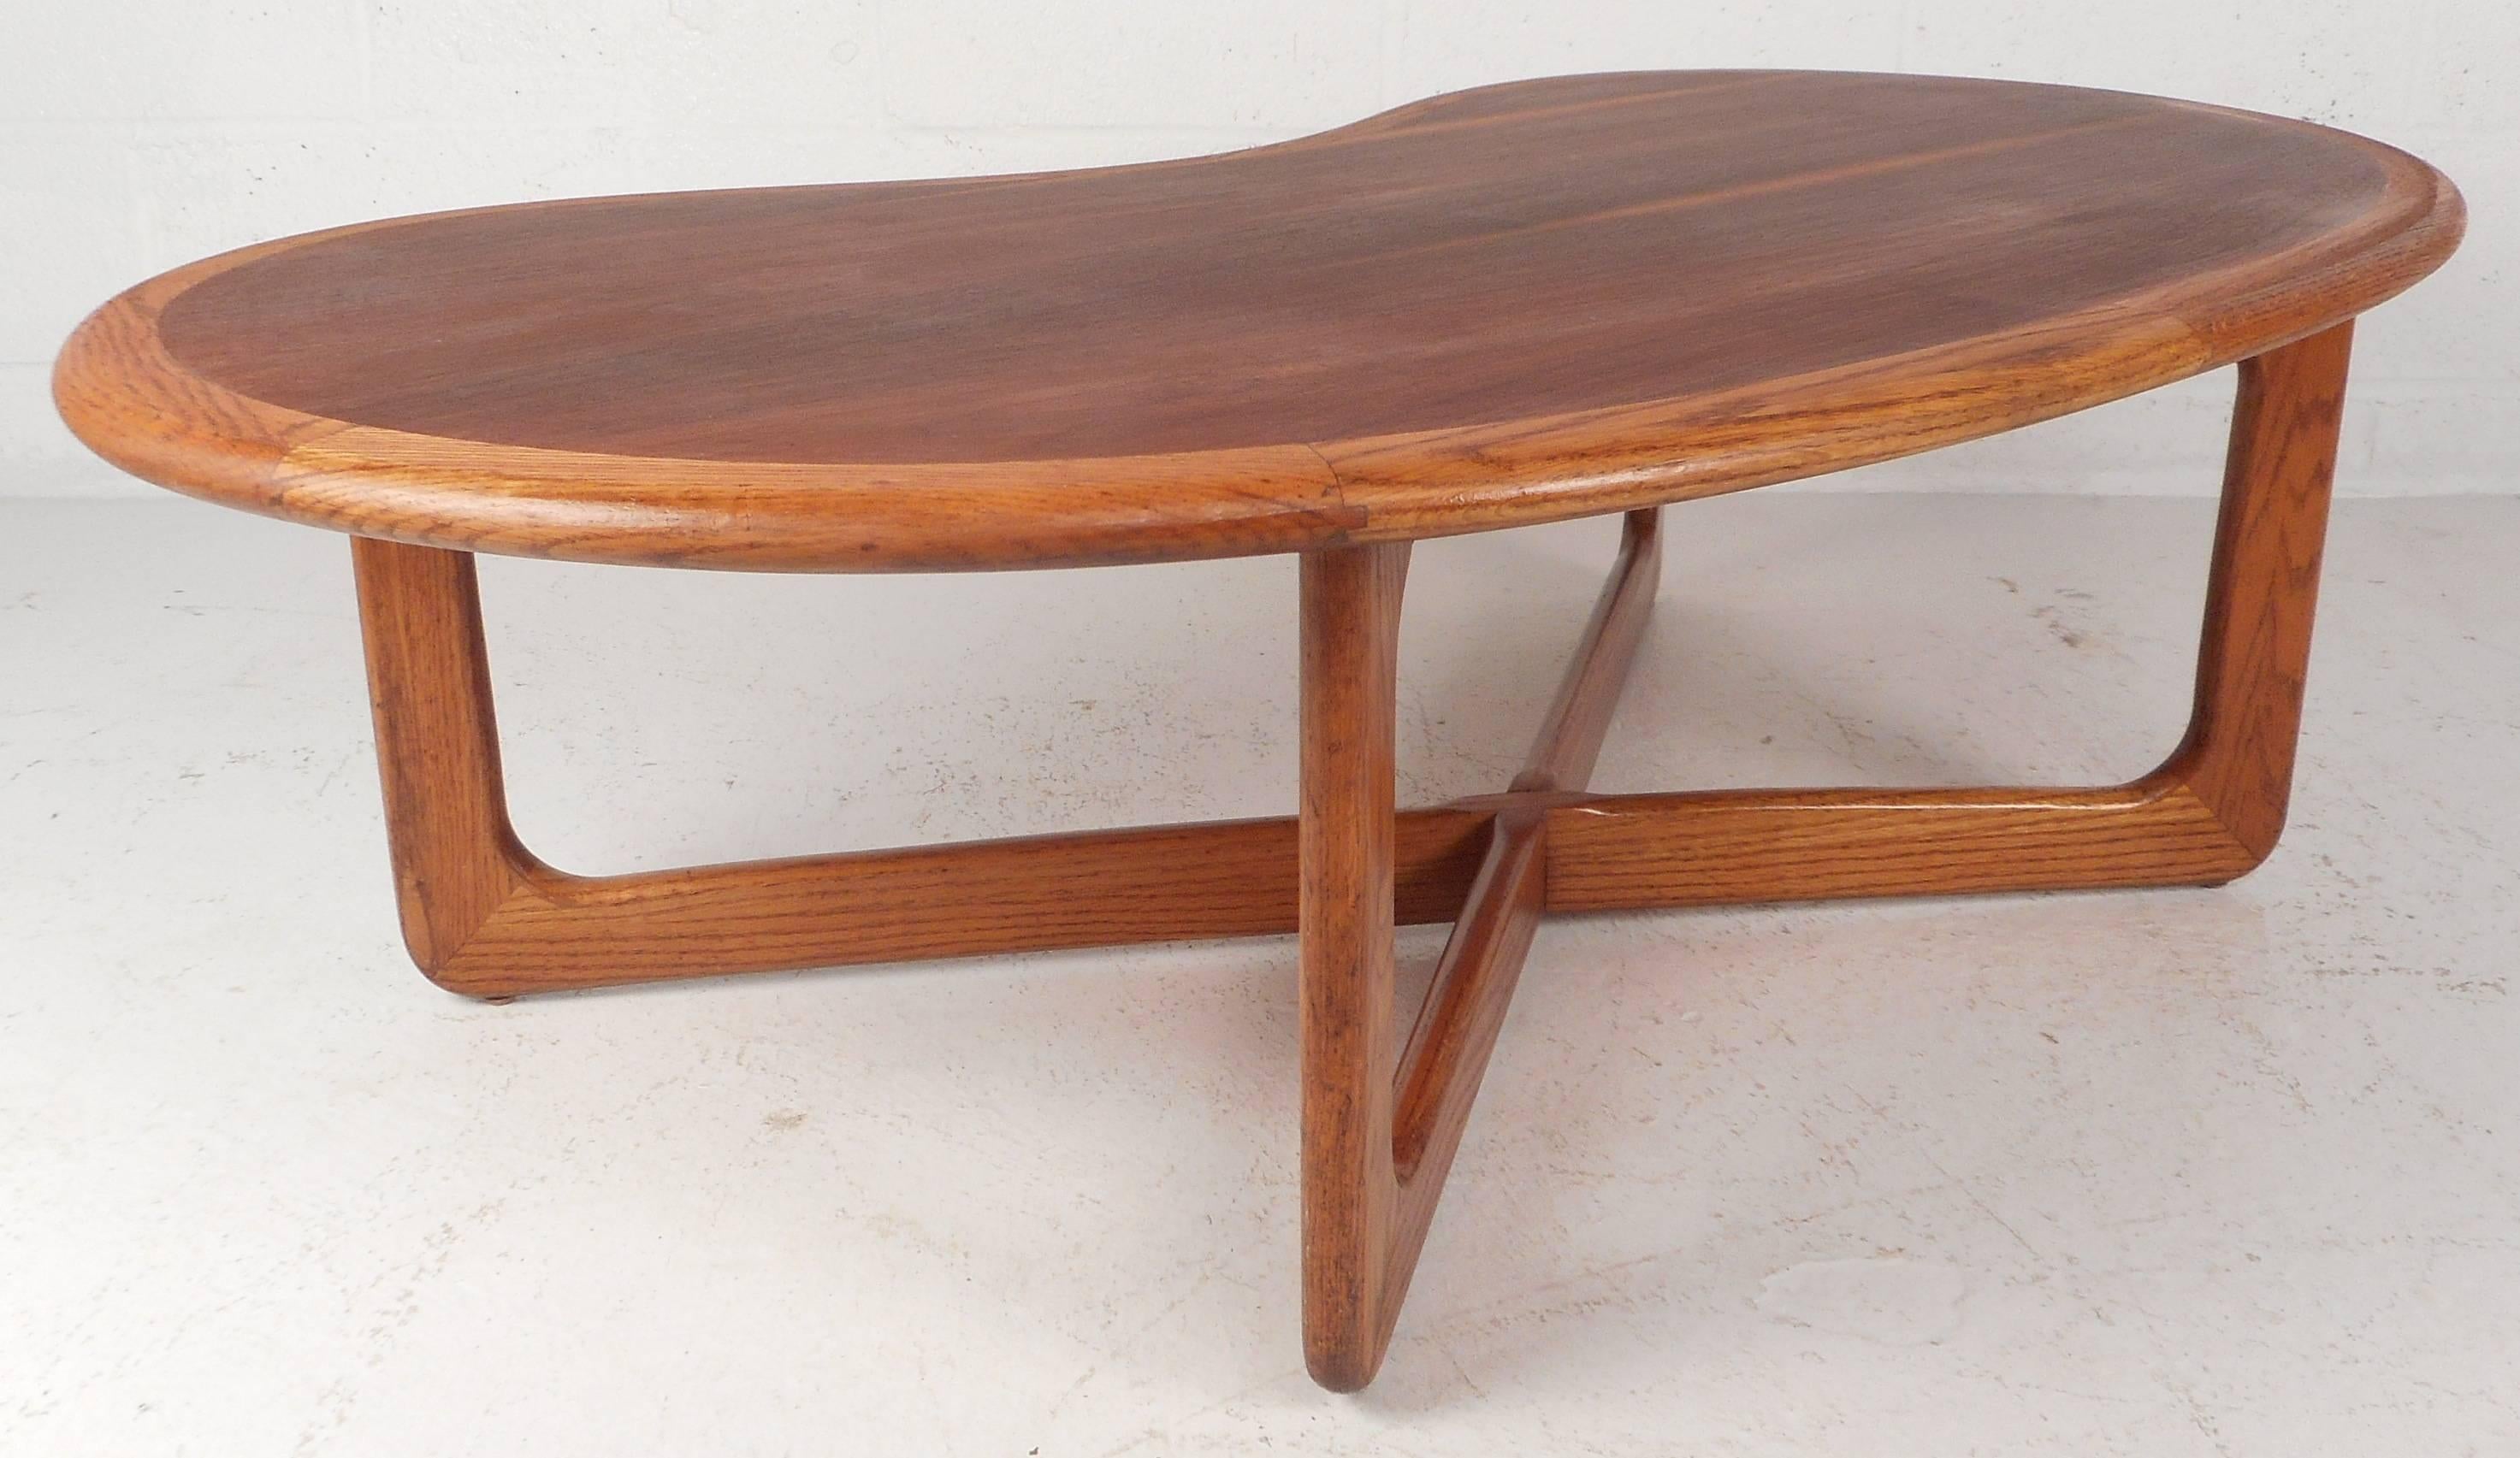 Elegant vintage modern coffee table features a unique kidney shape with a sturdy 